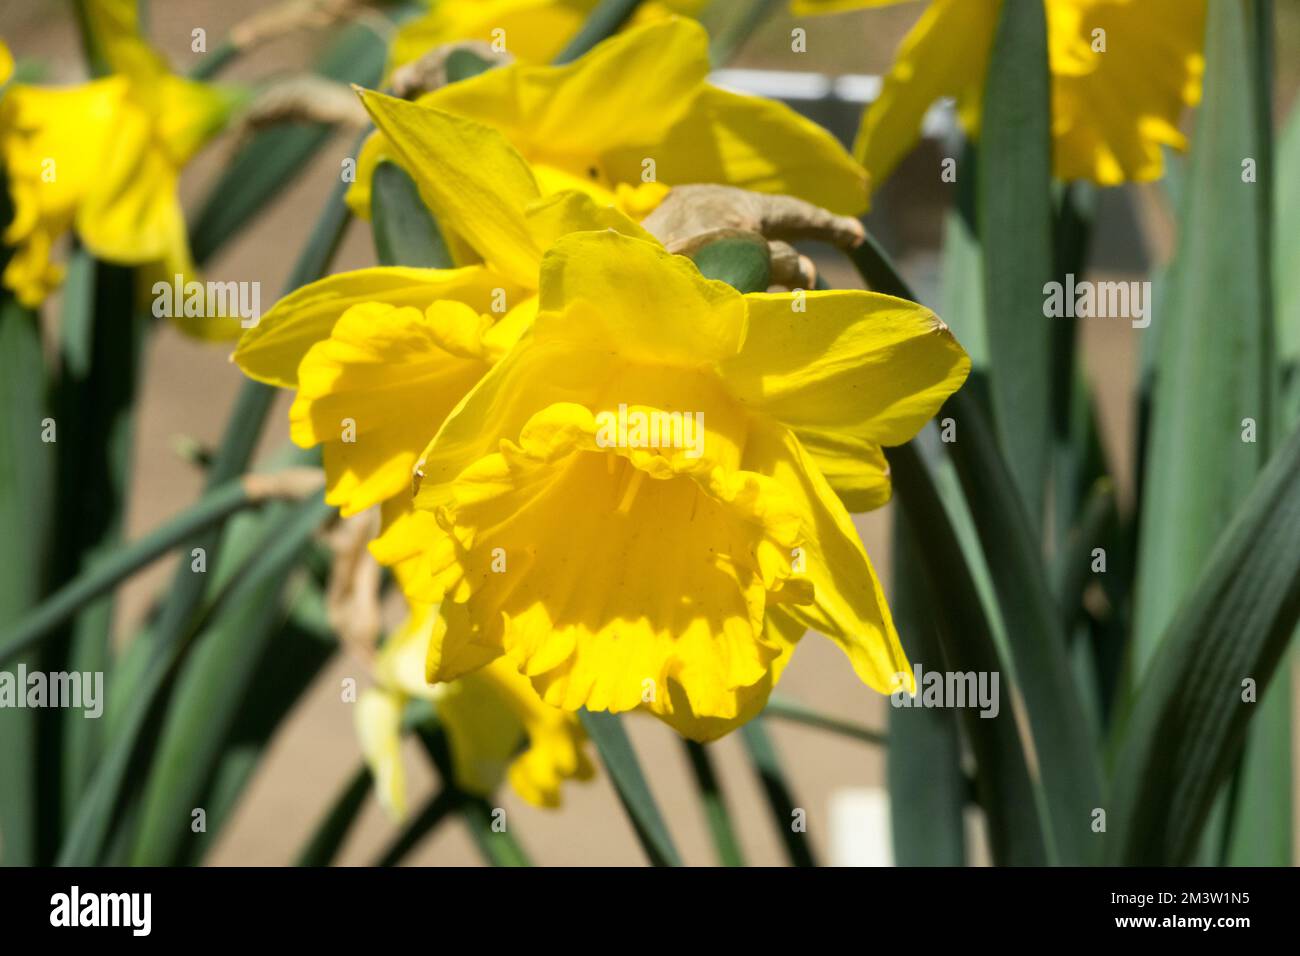 Yellow daffodil, Yellow, Cultivar, Daffodil, Narcissus, Close up, Flower, Blooming, Spring, Garden For cutting Daffodils Narcissus 'Arkle' Stock Photo